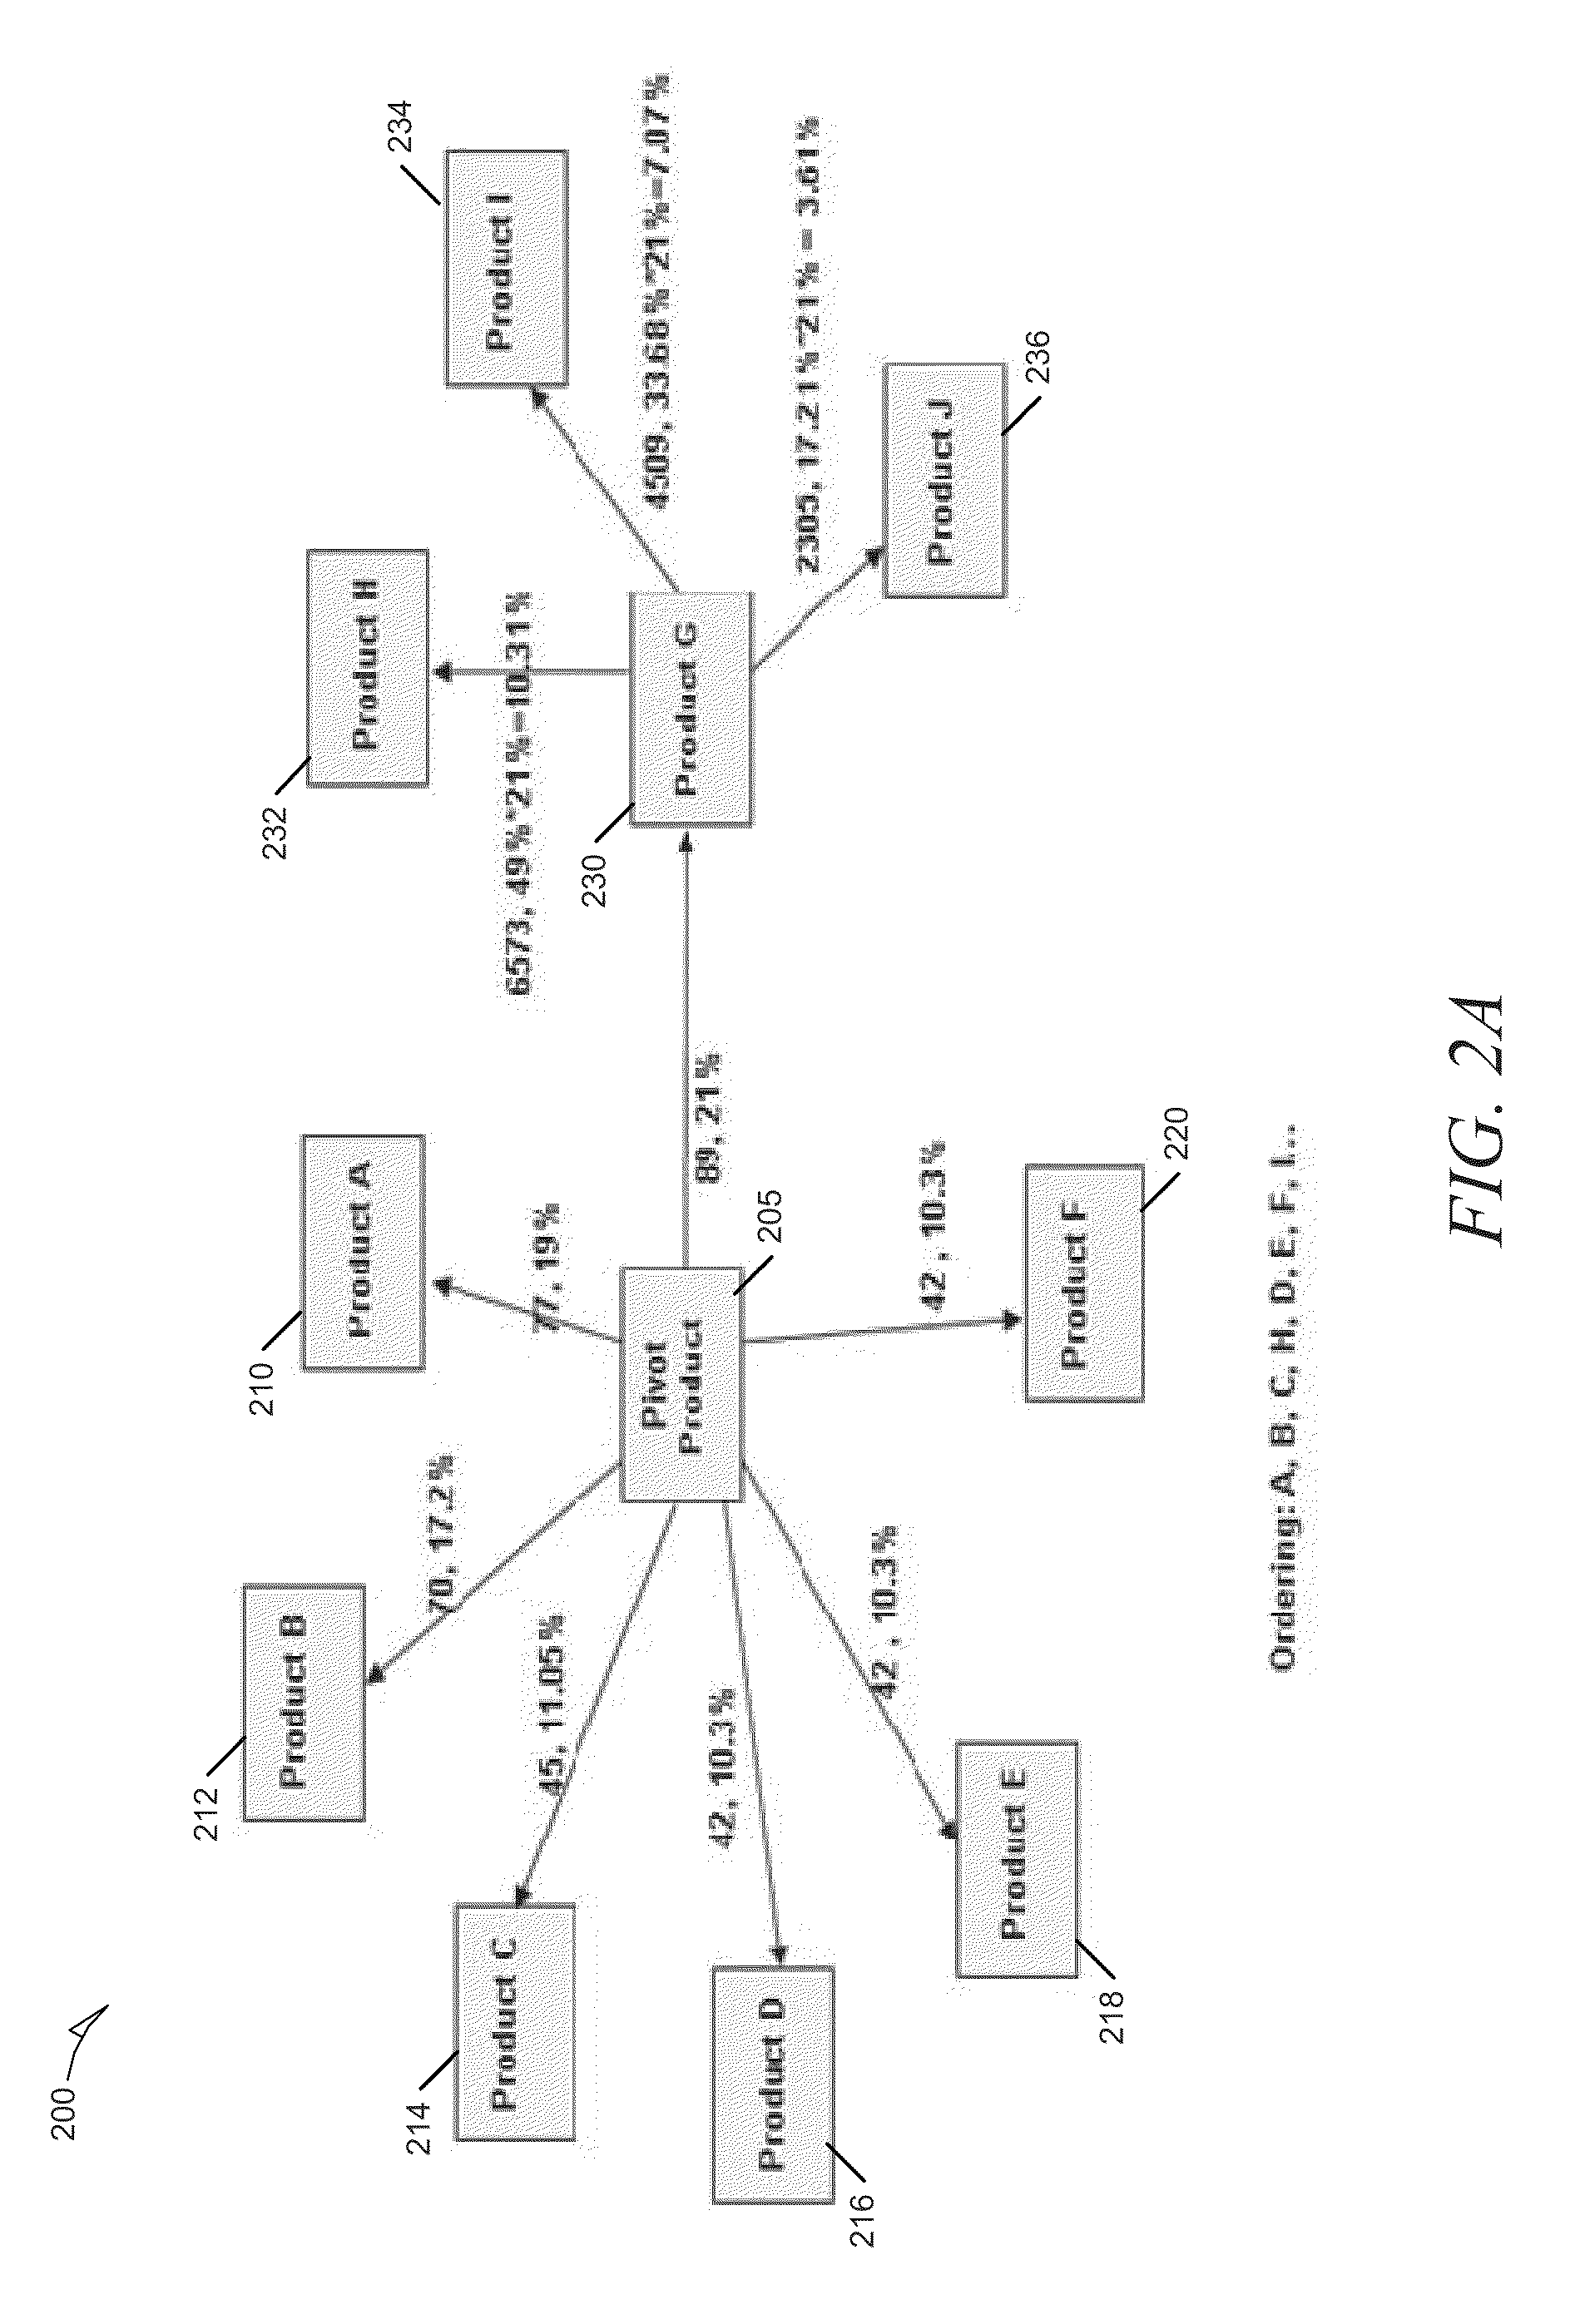 Systems and methods for trend aware self-correcting entity relationship extraction